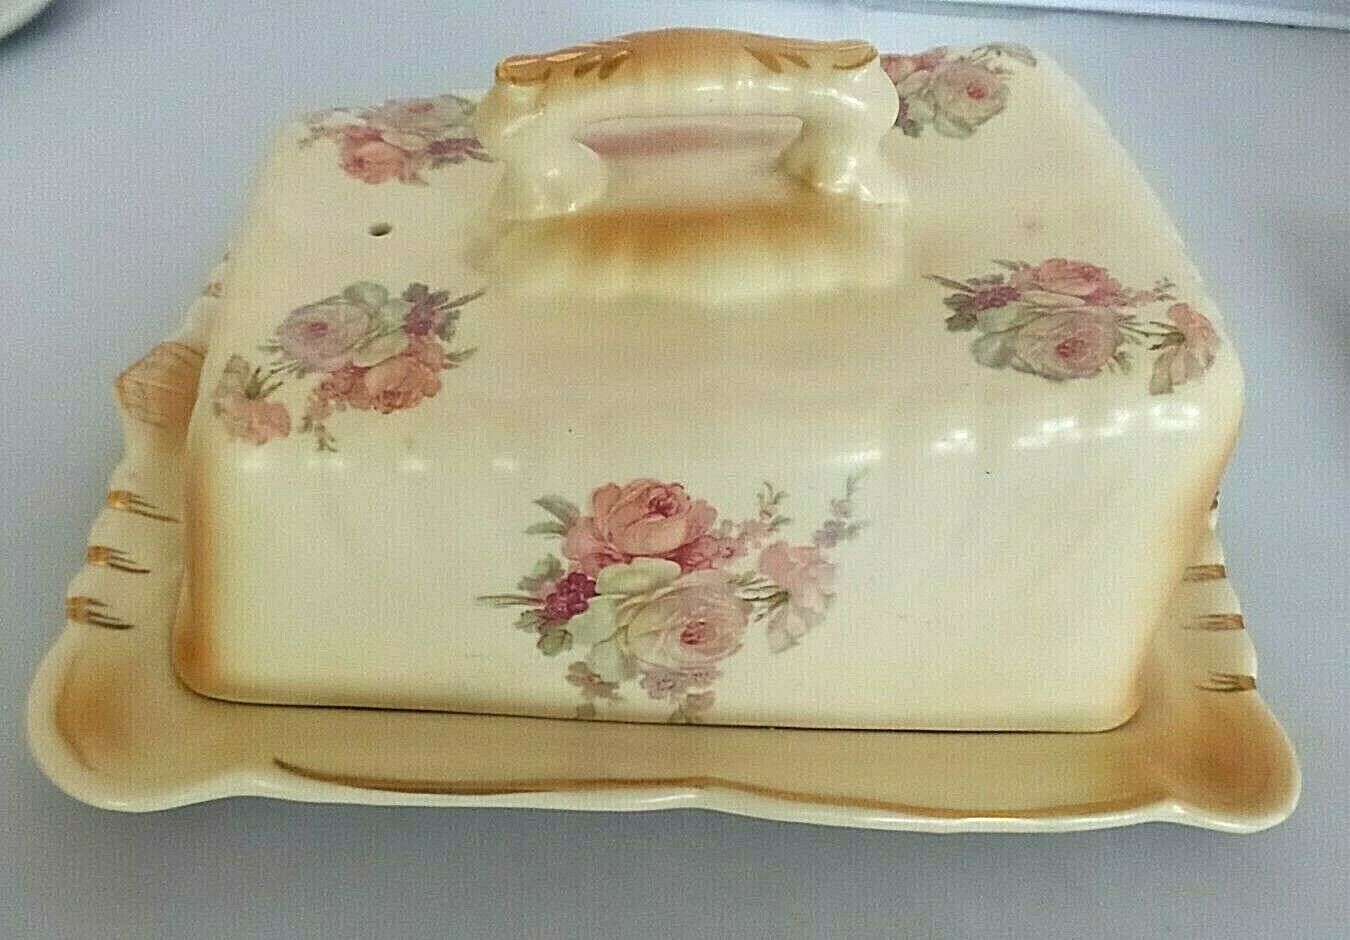 ANTIQUE CERAMIC CHEESE DISH FLORAL  WITH COVER